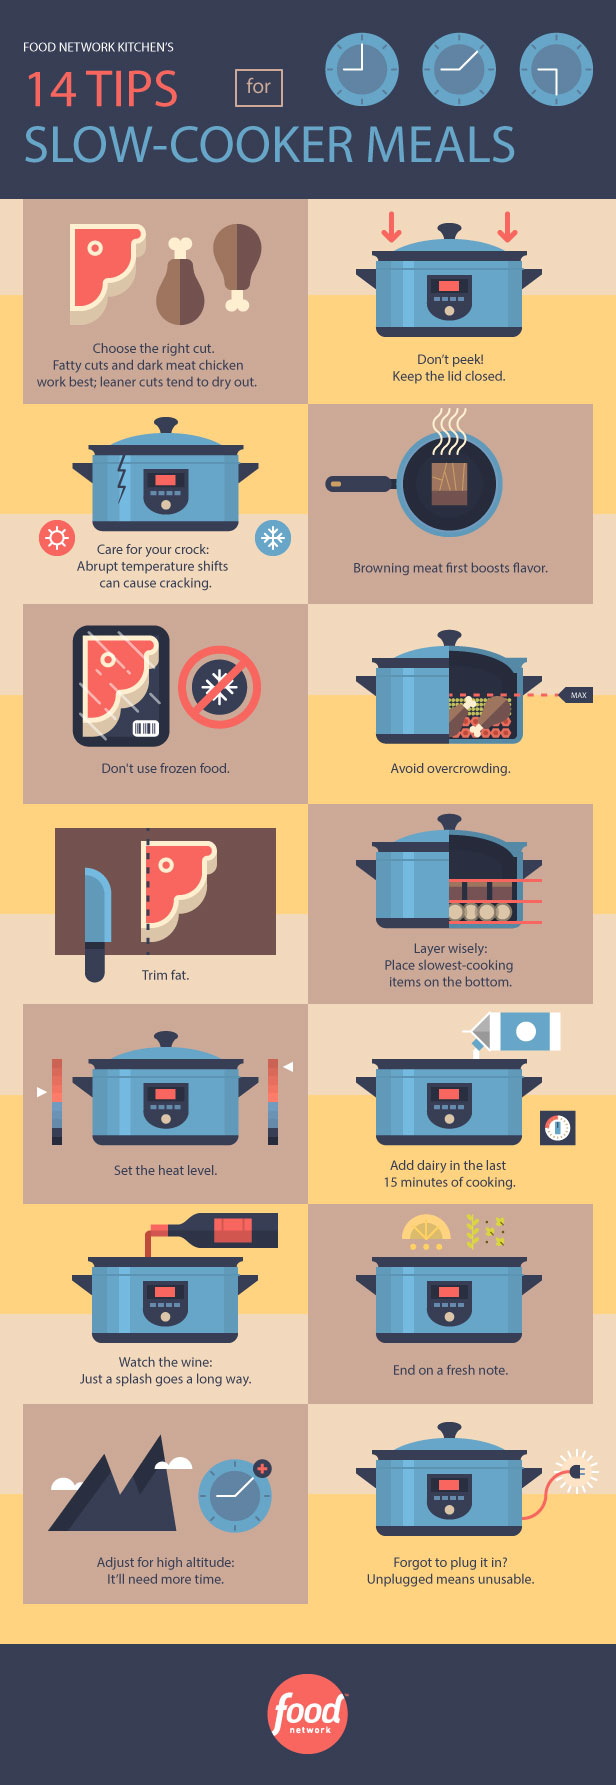 https://food.fnr.sndimg.com/content/dam/images/food/unsized/2015/9/17/0/FN_Infographic-Slow-Cooker-Tips_s616x1785.jpg